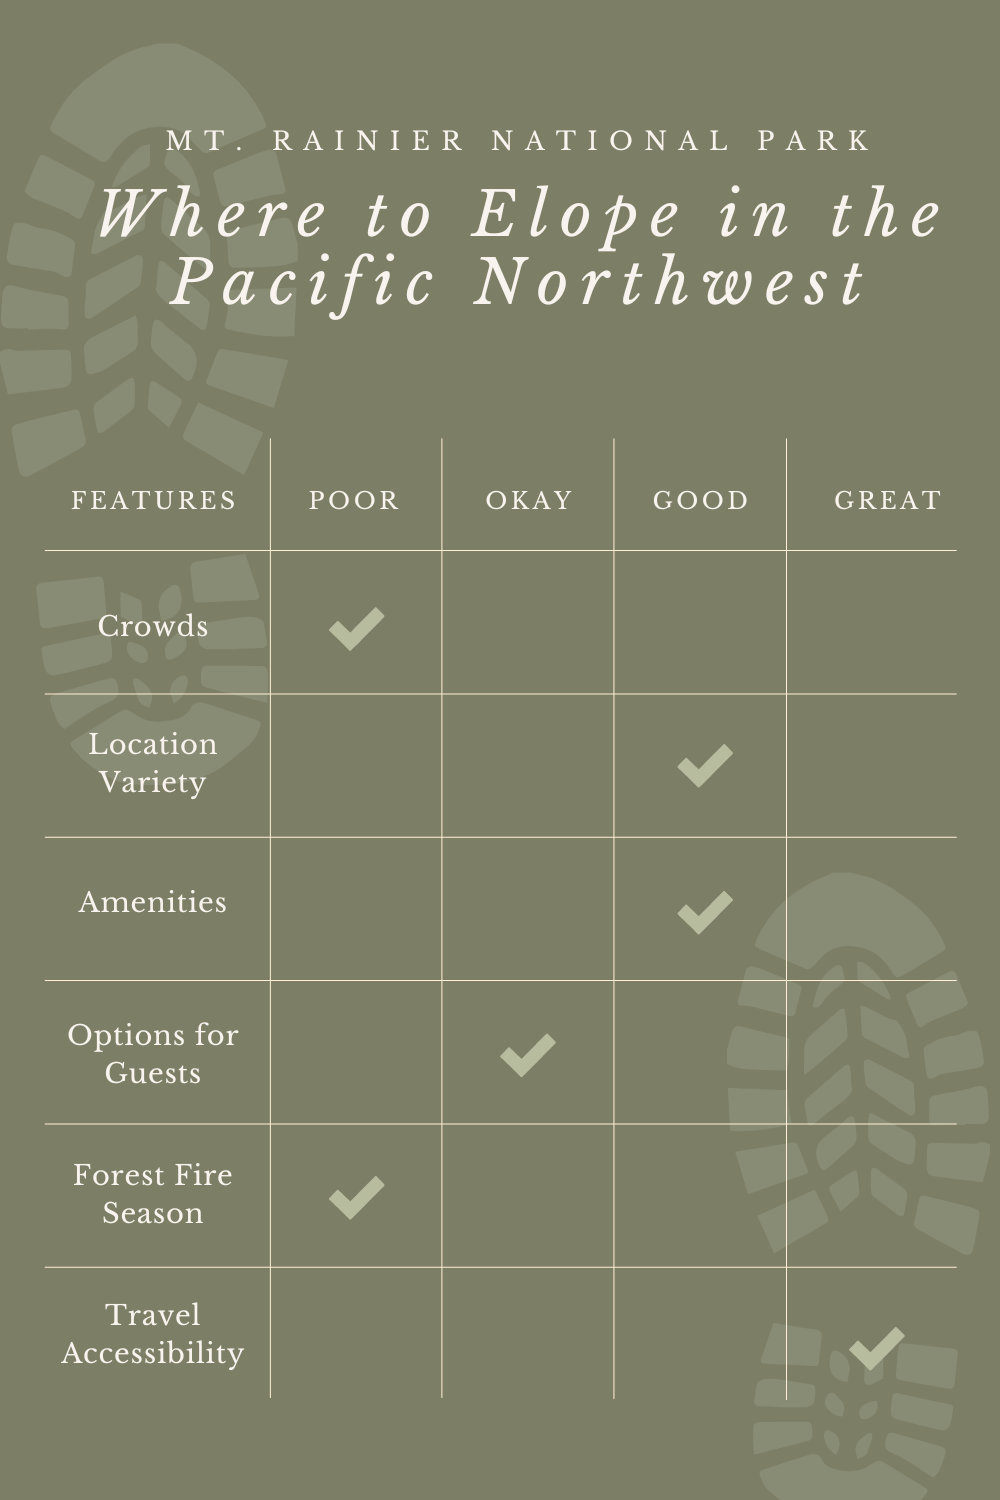 Where to elope in the Pacific Northwest - Mt. Rainier National Park infographic